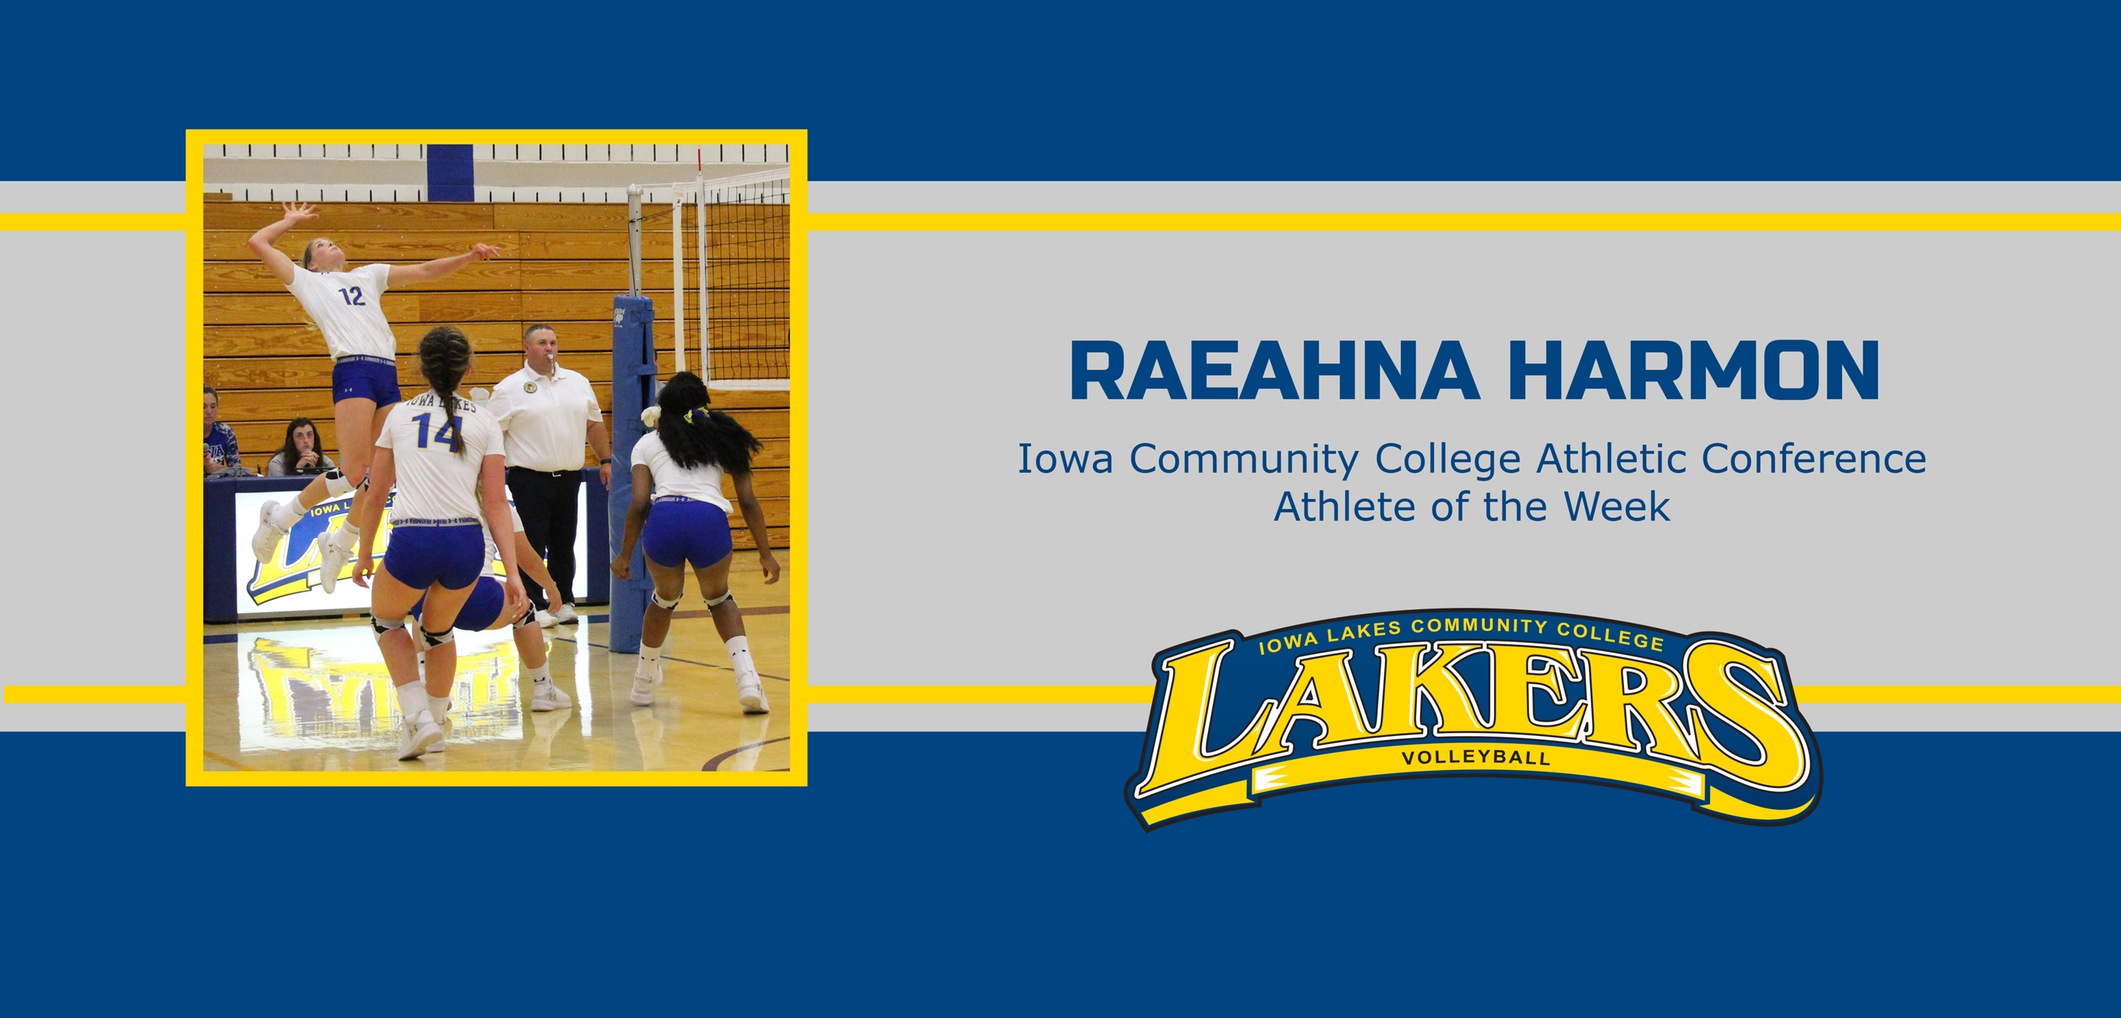 Harmon Named ICCAC Athlete of the Week